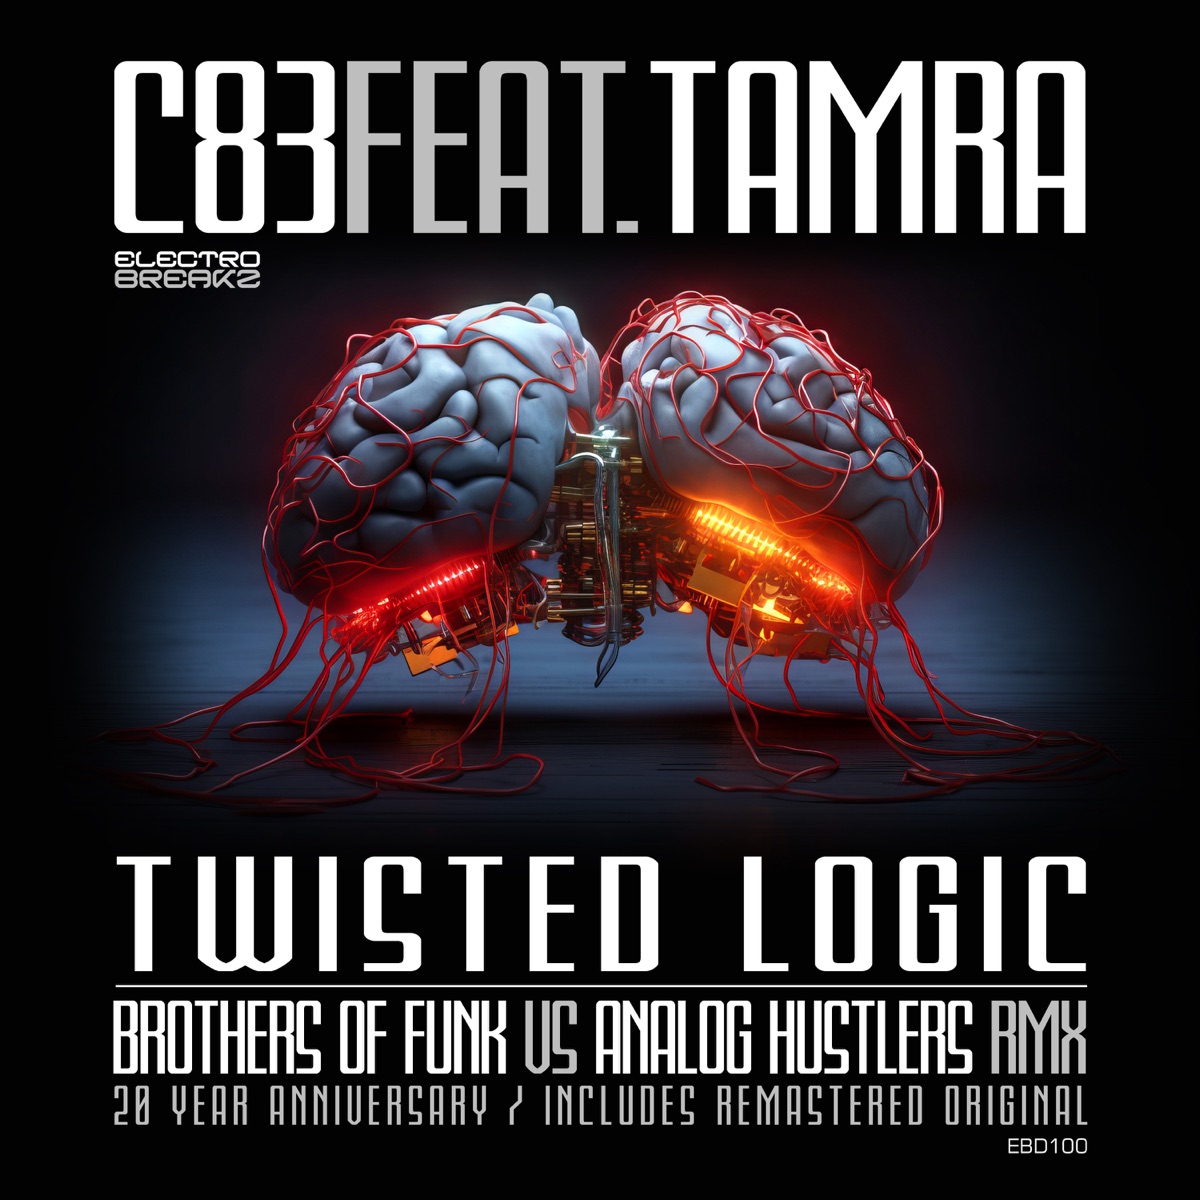 Twisted Logic (feat. Tamra) - Single by Analog Hustlers, Brothers of Funk,  C83 & Tamra on Apple Music